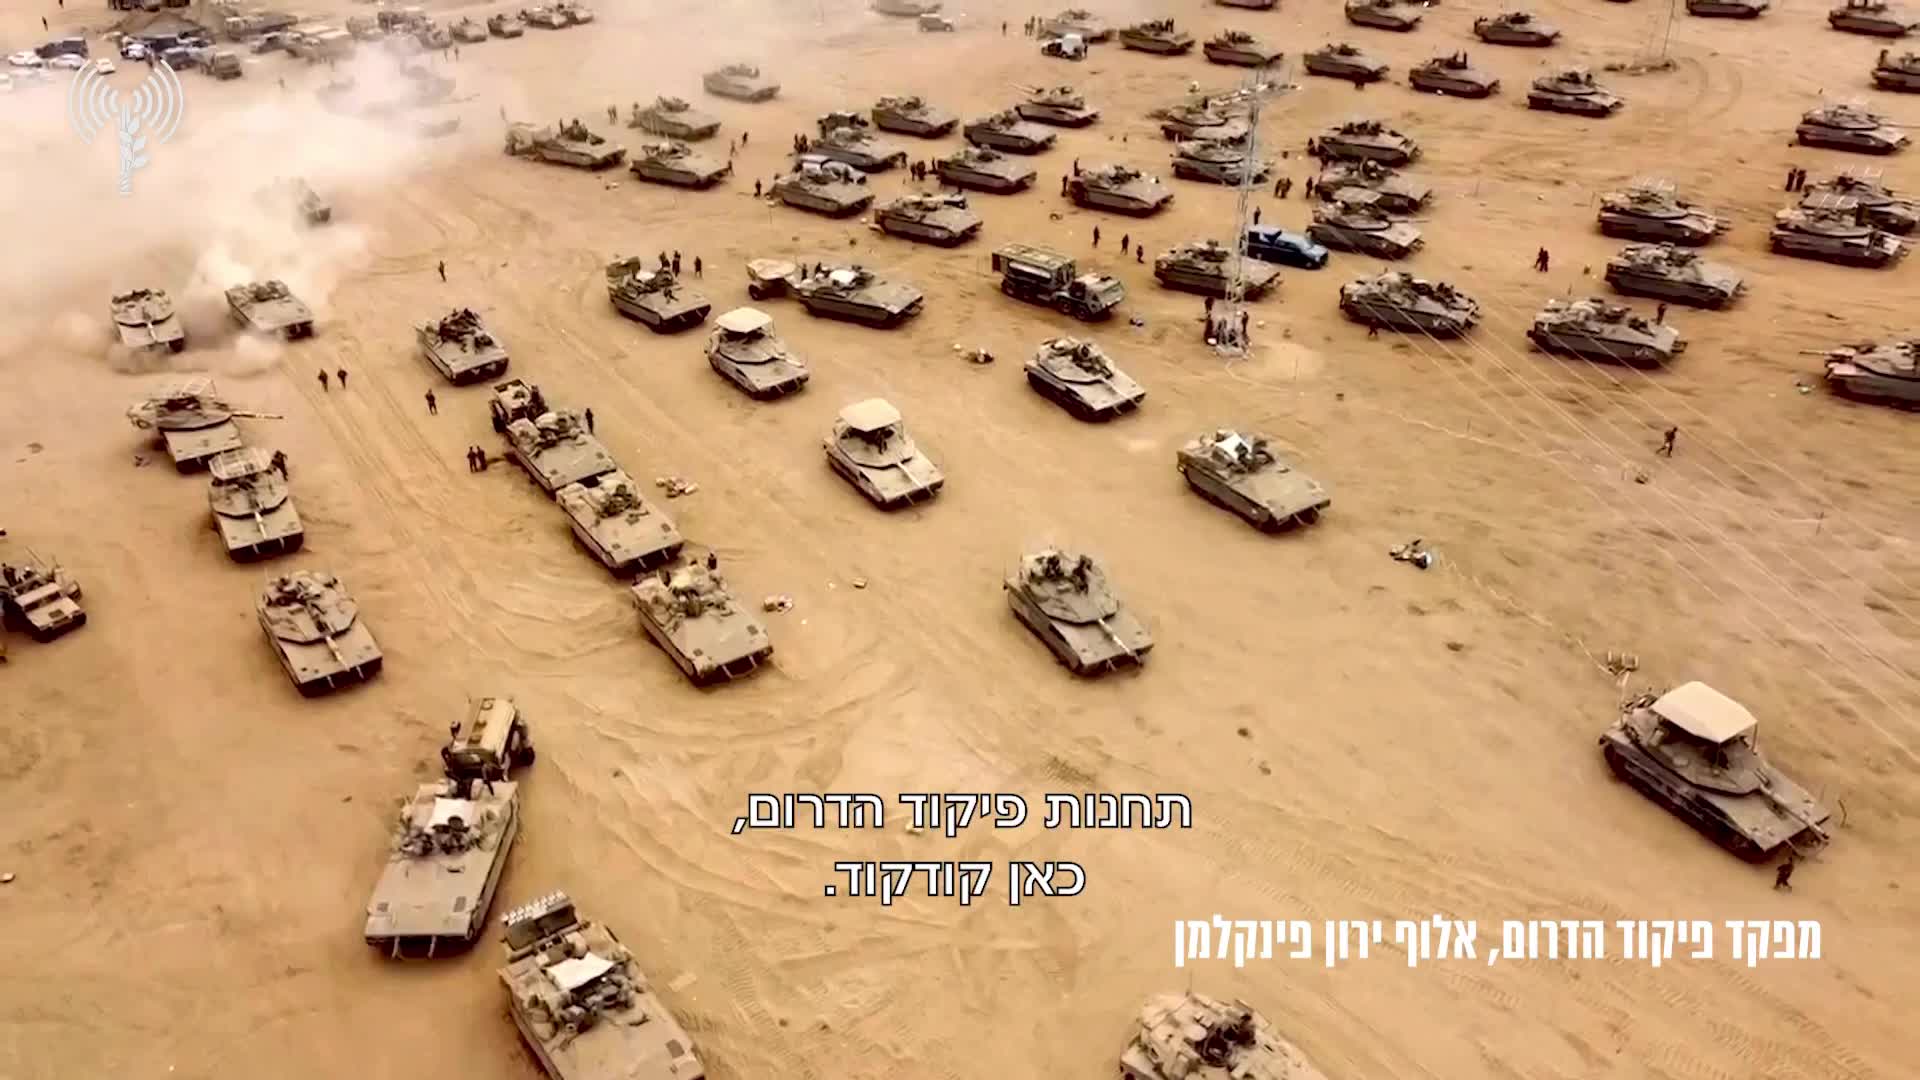 We will fight in the alleys, and we will fight in the tunnels, we will fight where necessary and defeat the abominable enemy we are facing - the residents of Bari, Sderot, Nir Oz and Kafr Gaza. The whole nation of Israel is with you, - the commander of the Southern Command to the fighters before entering the Gaza Strip.